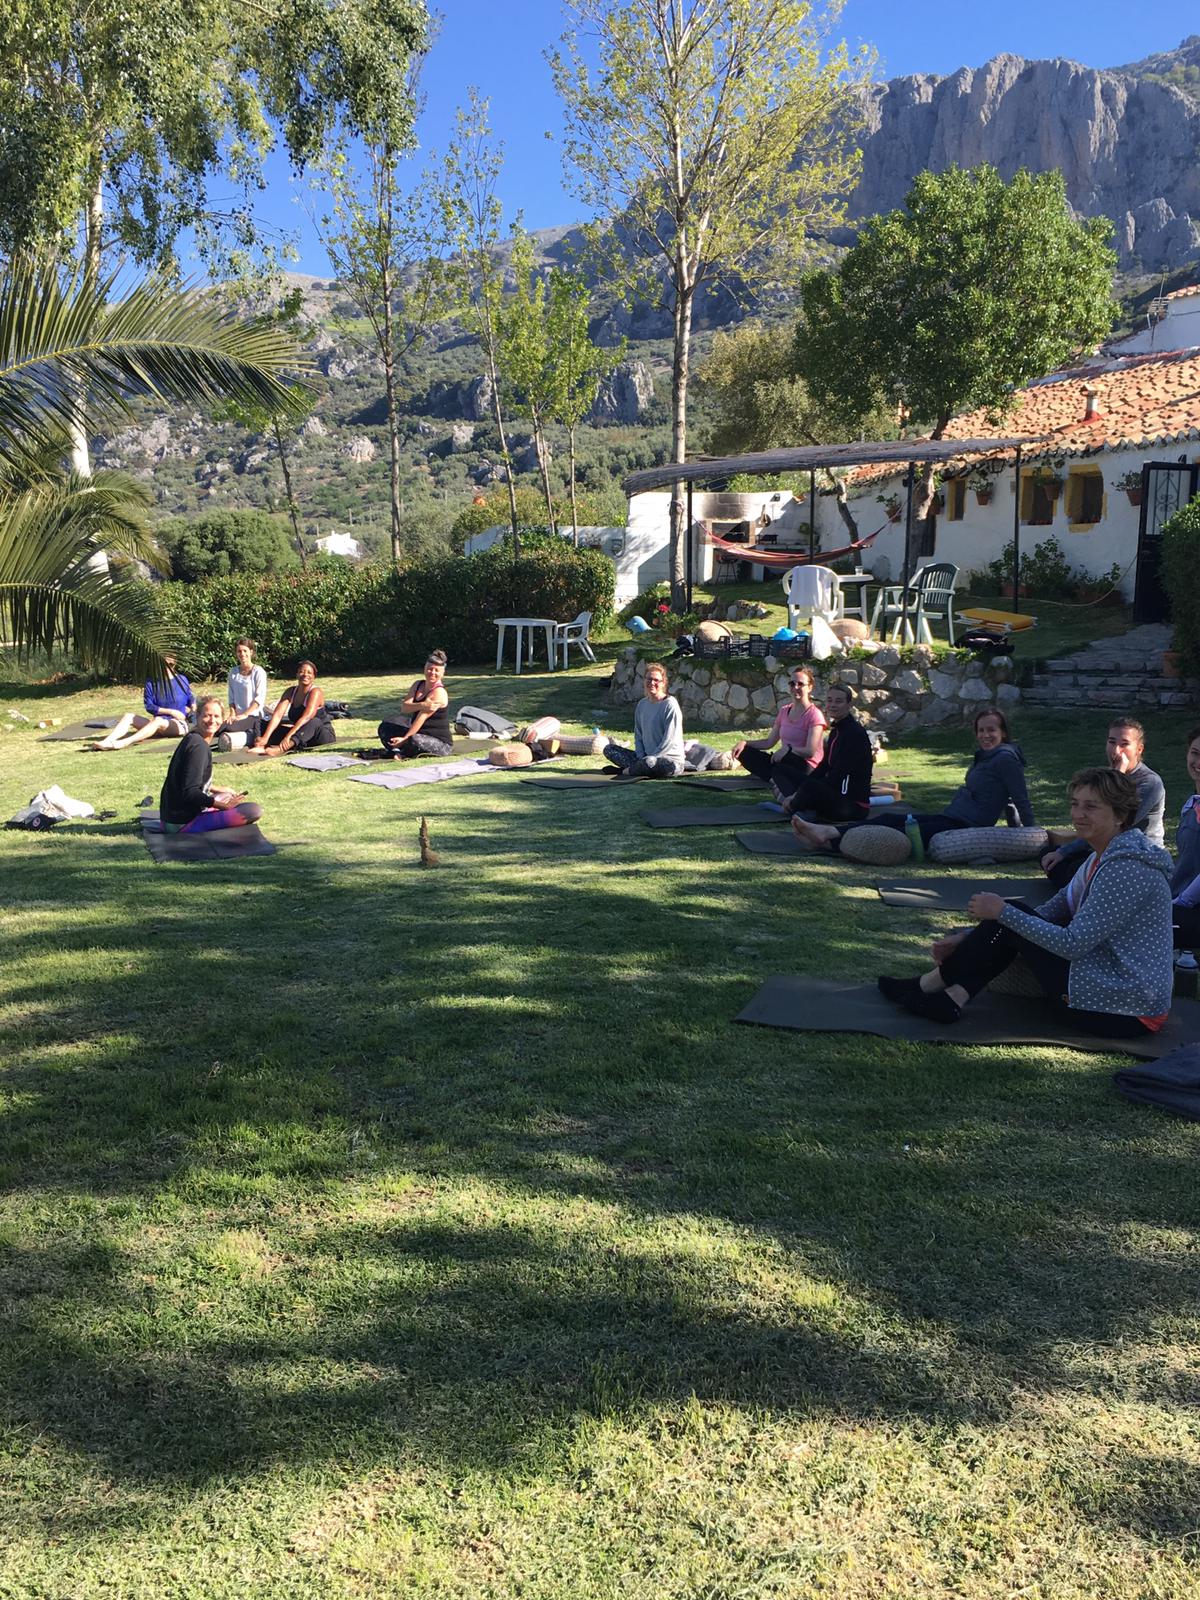 Yoga practice in the garden at Yin Yang Yoga retreat in the Malaga mountains in Spain with Jane Bakx Yoga